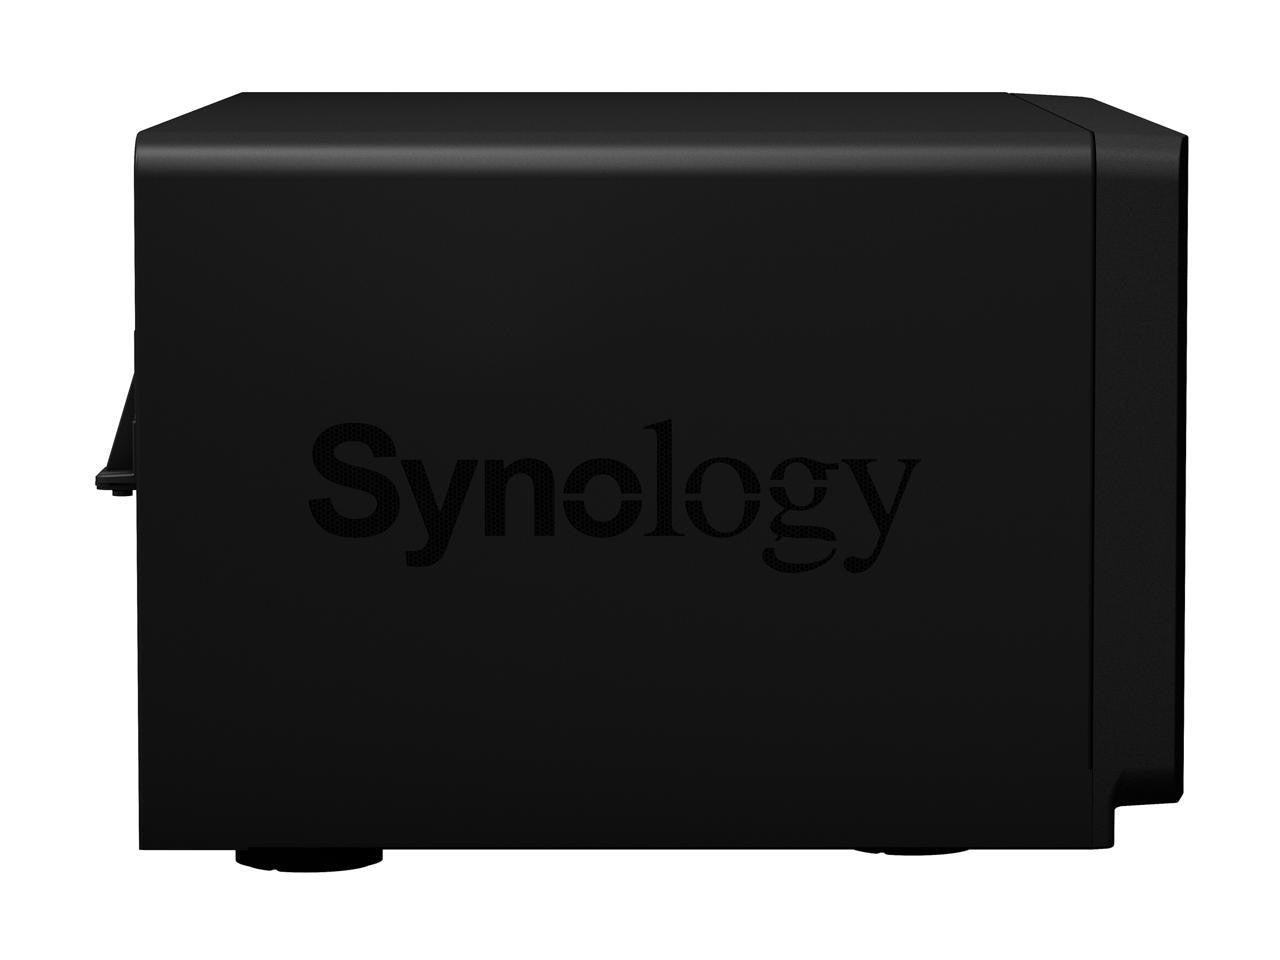 Synology DS1821+ 8-BAY DiskStation with 32GB Synology RAM and 24TB (8x3TB) Western Digital RED PLUS Drives Fully Assembled and Tested